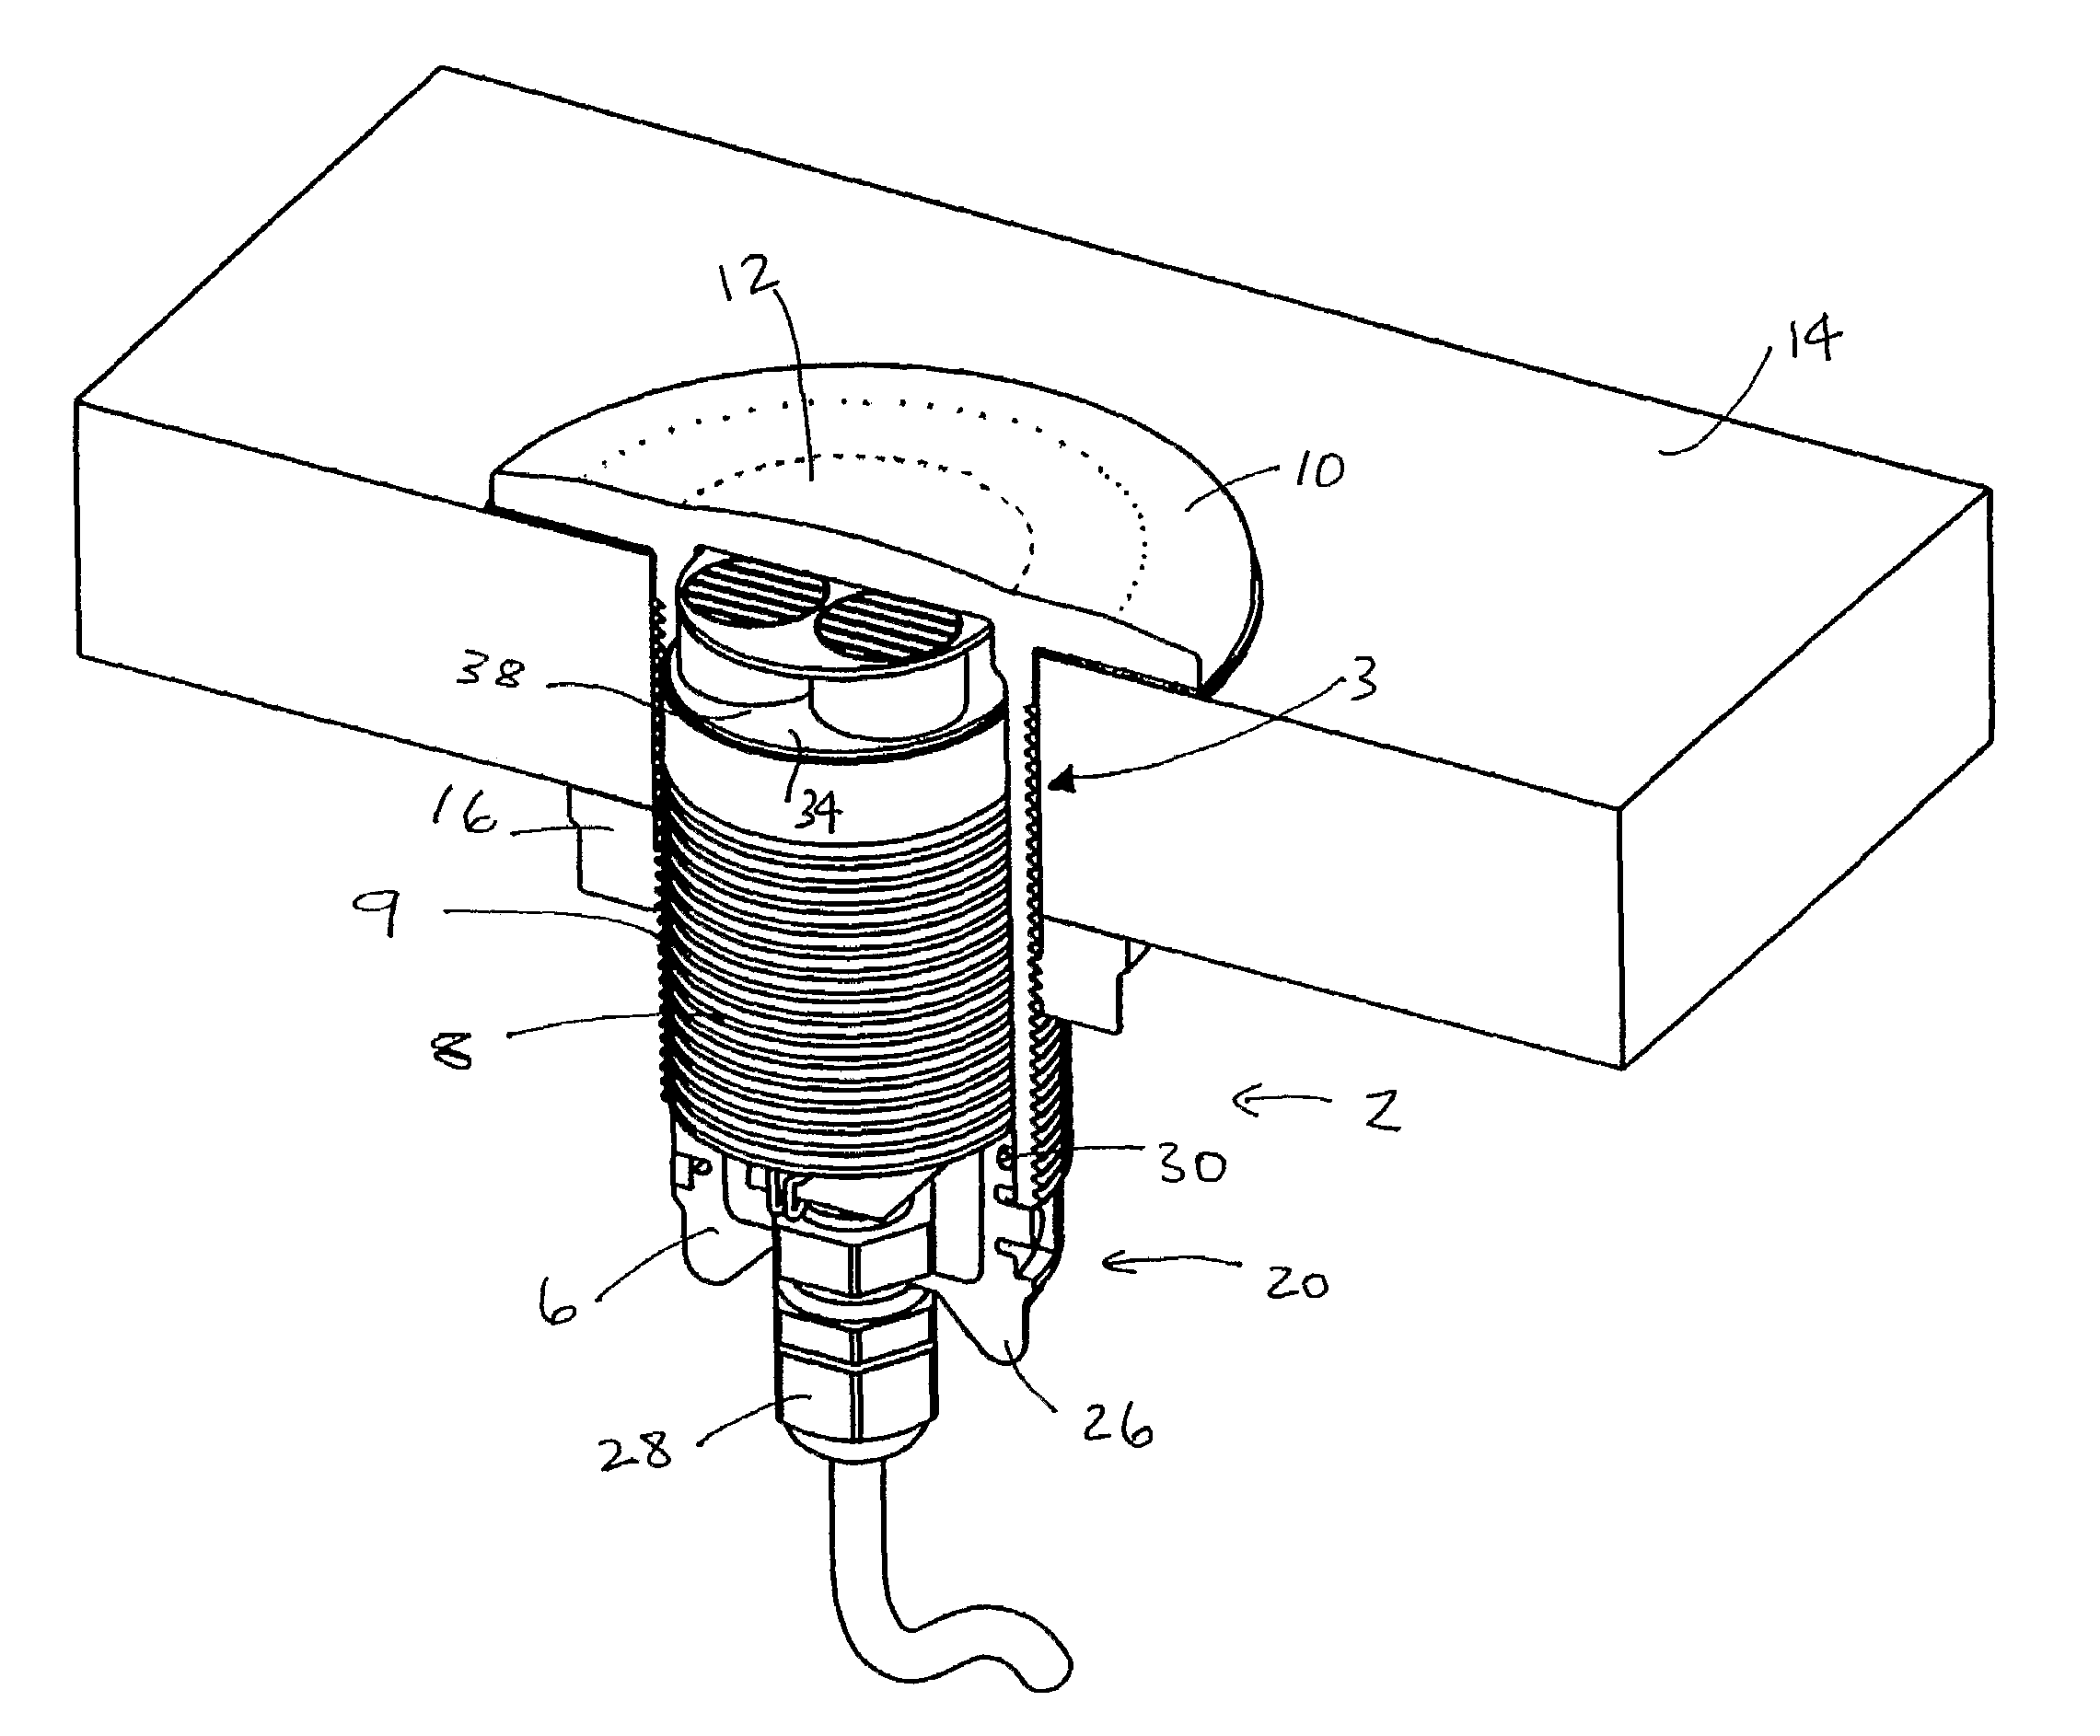 LED lighting apparatus in a plastic housing